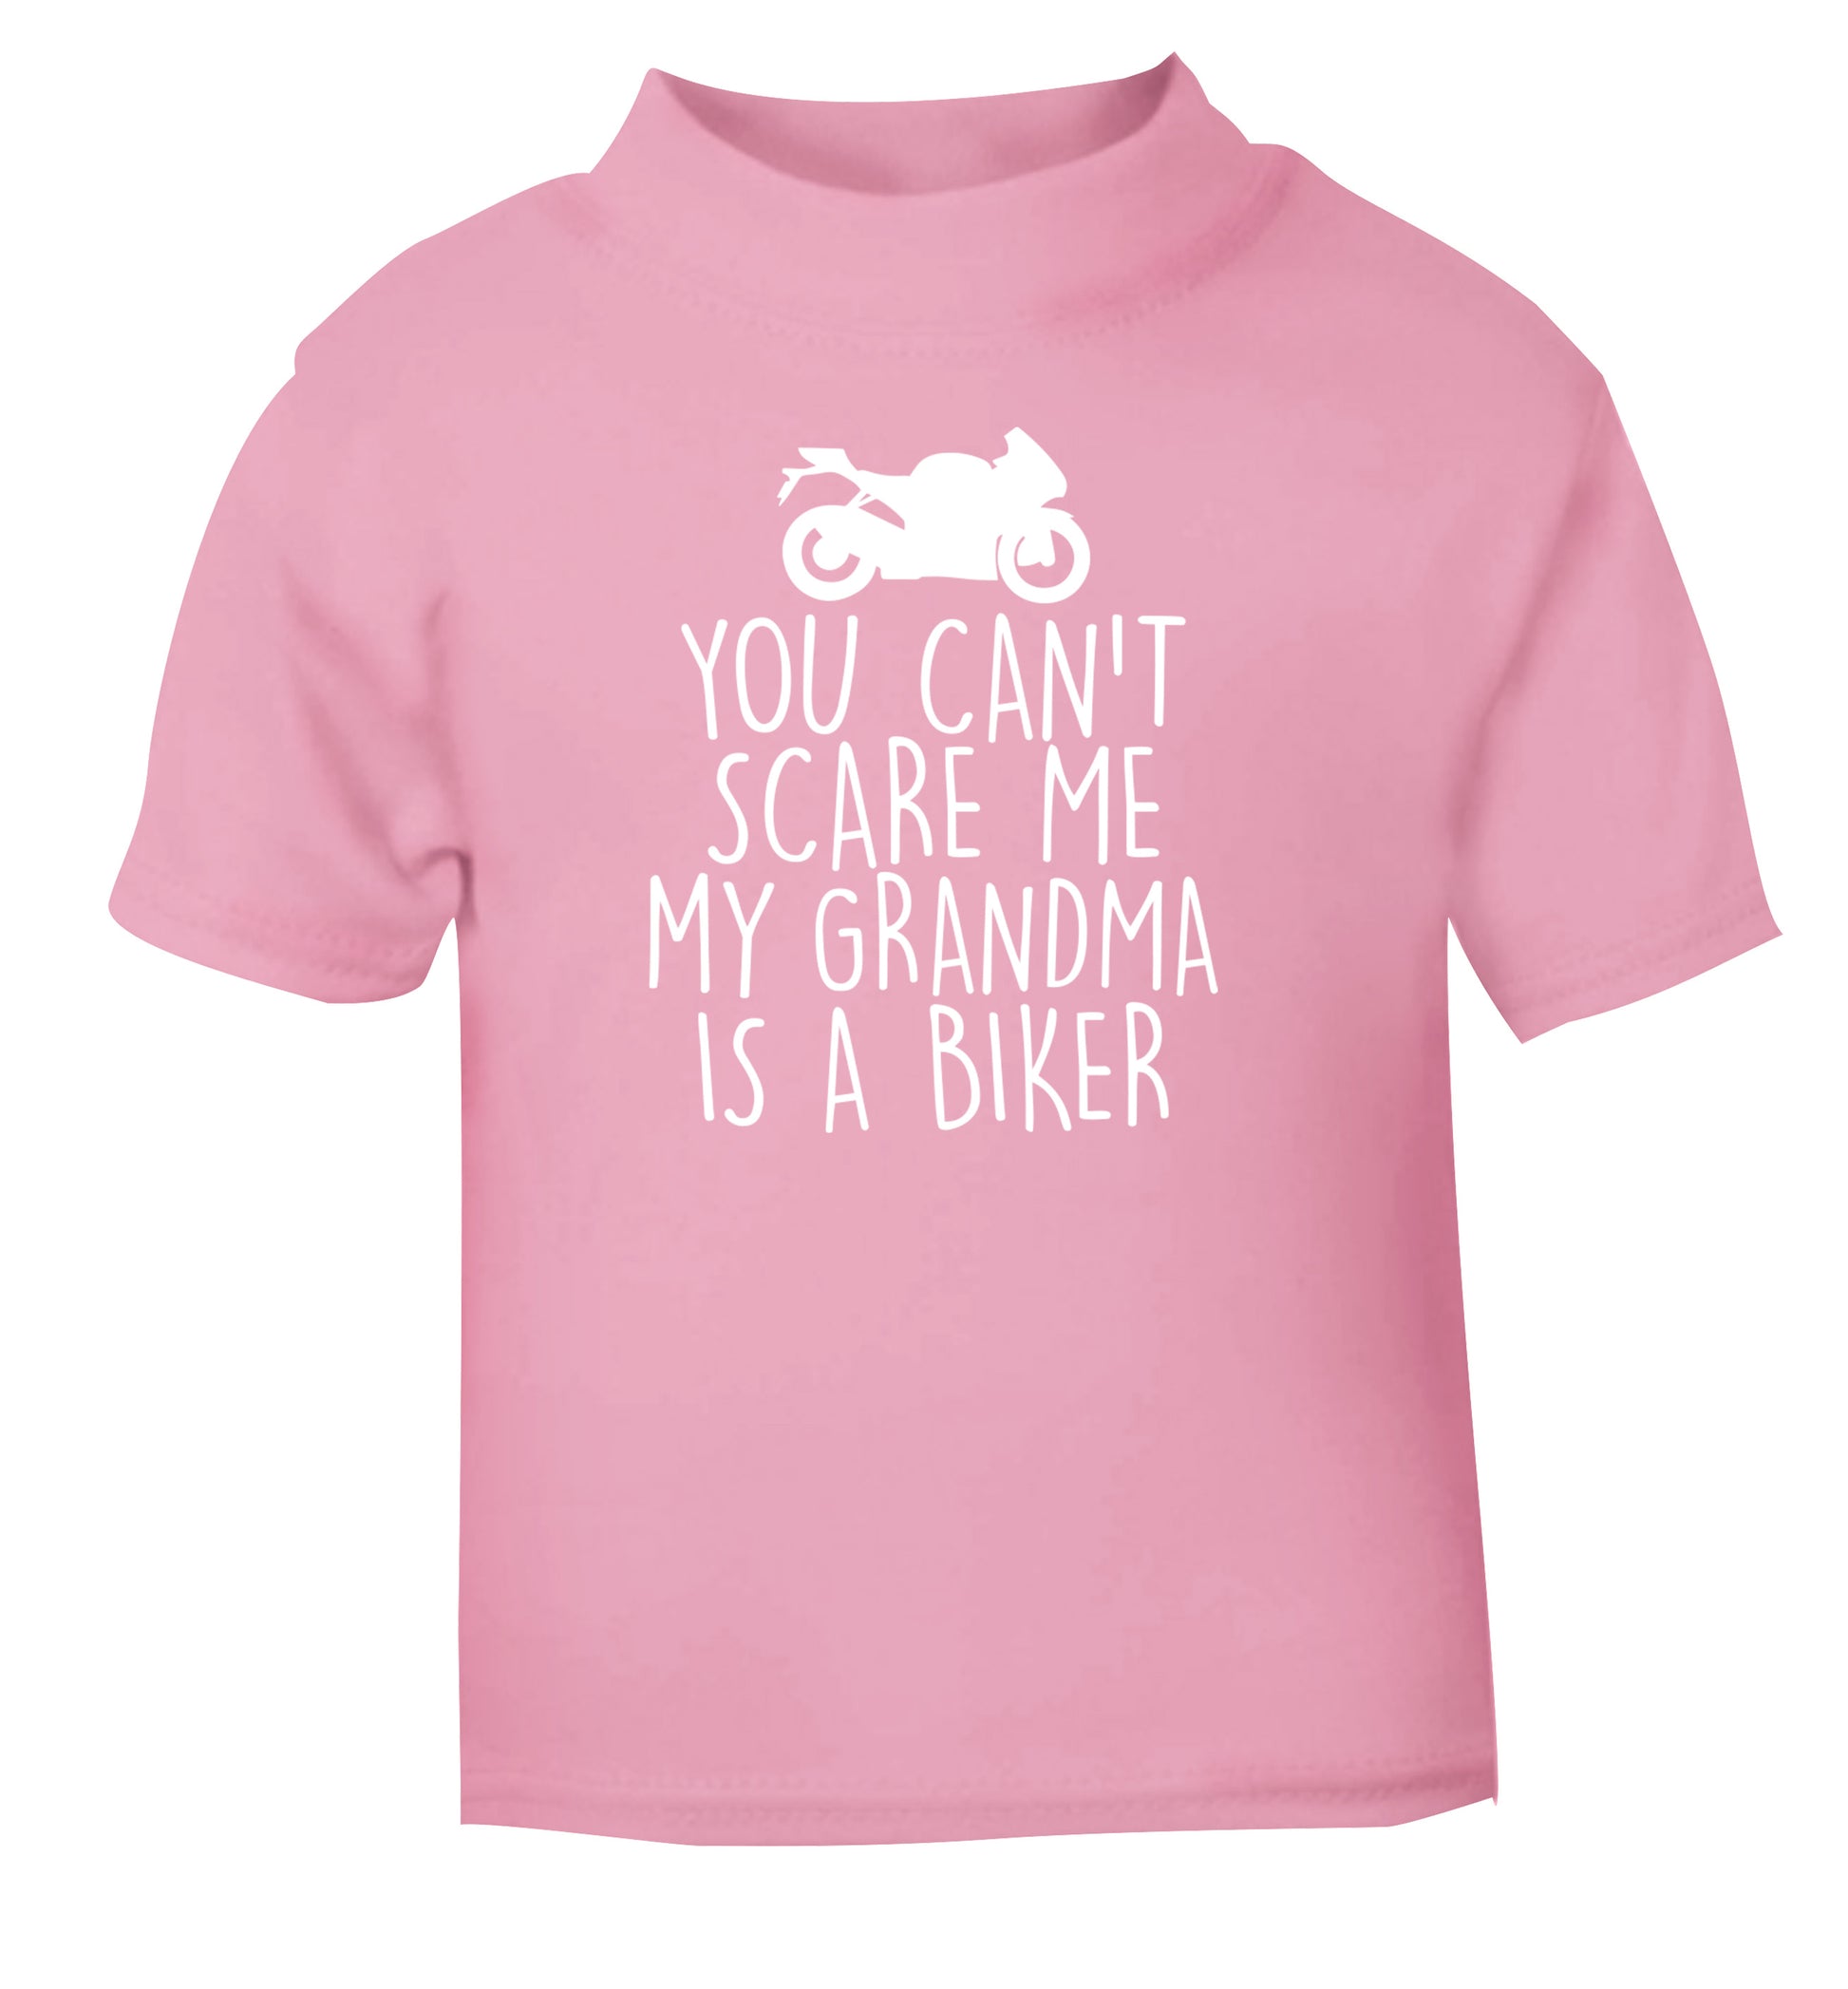 You can't scare me my grandma is a biker light pink Baby Toddler Tshirt 2 Years